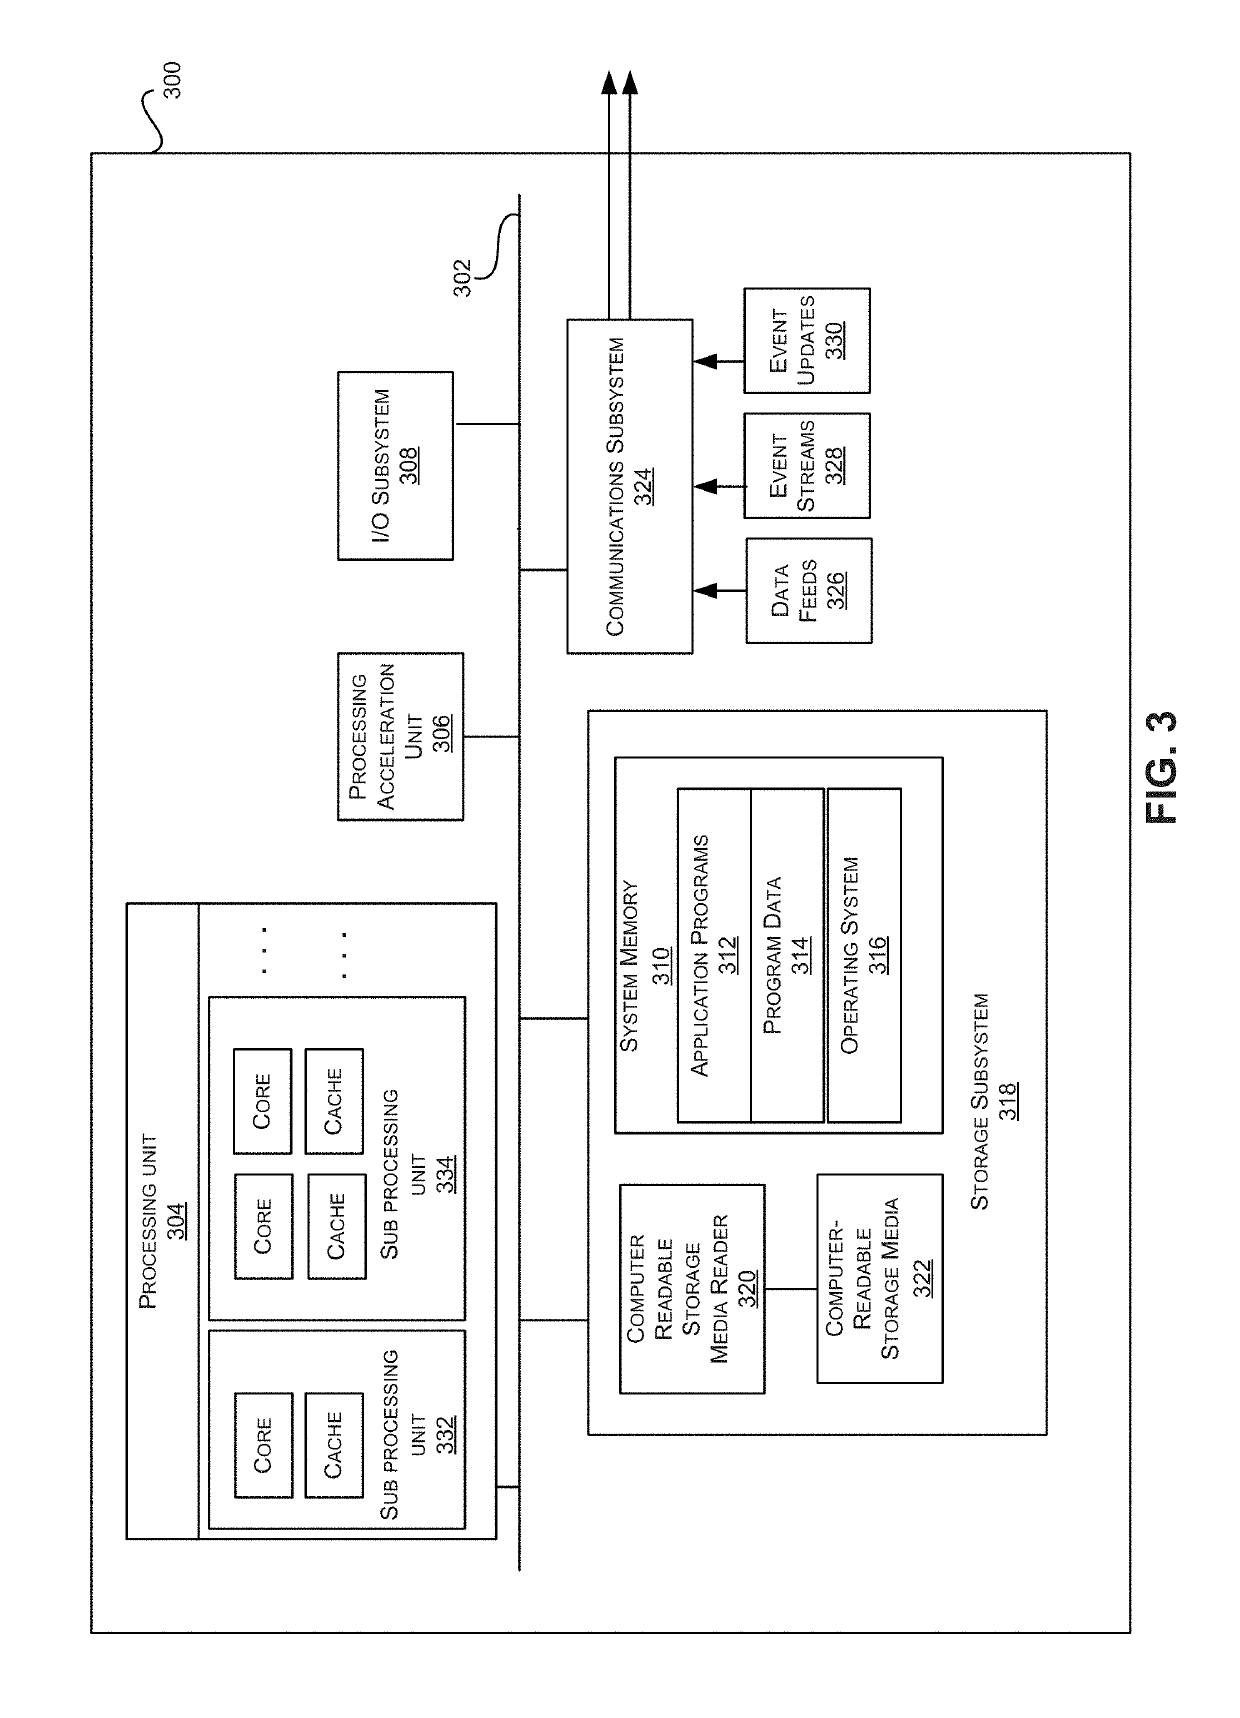 Memory fabric operations and coherency using fault tolerant objects